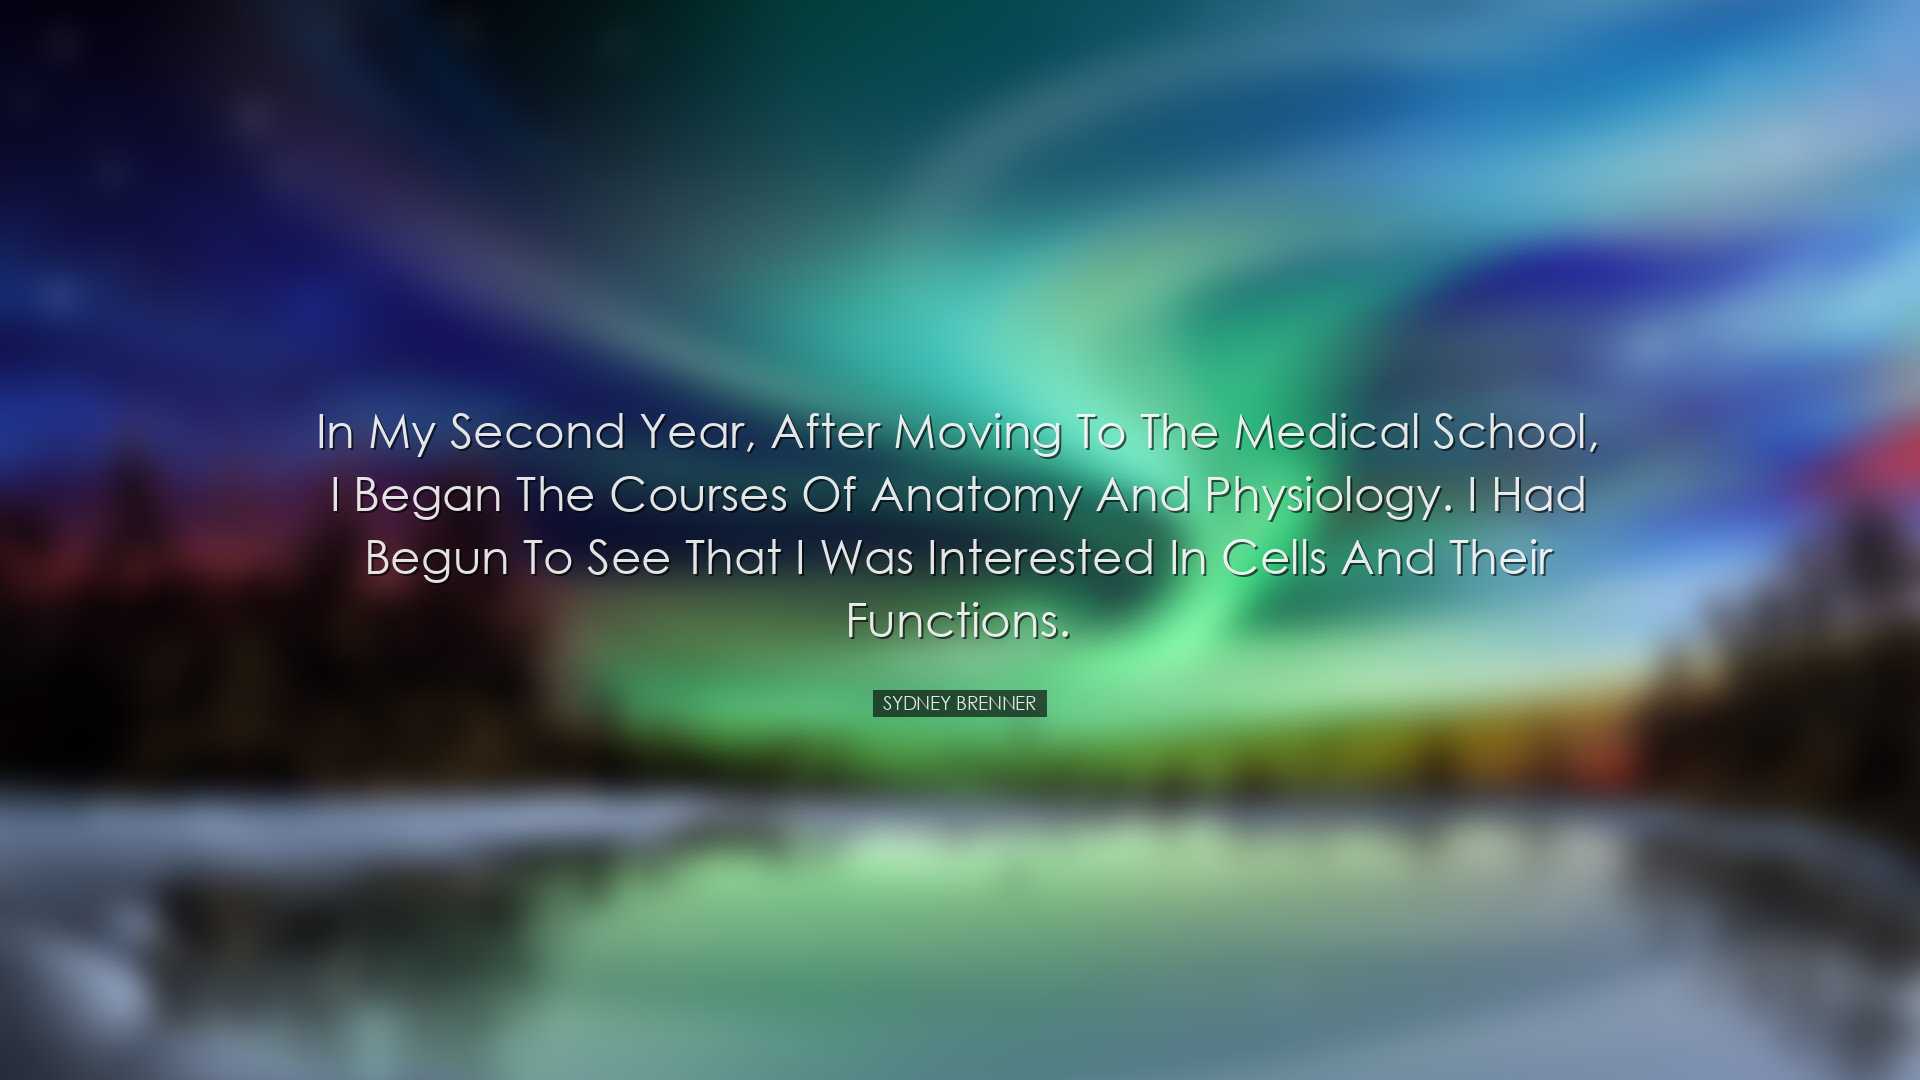 In my second year, after moving to the Medical School, I began the